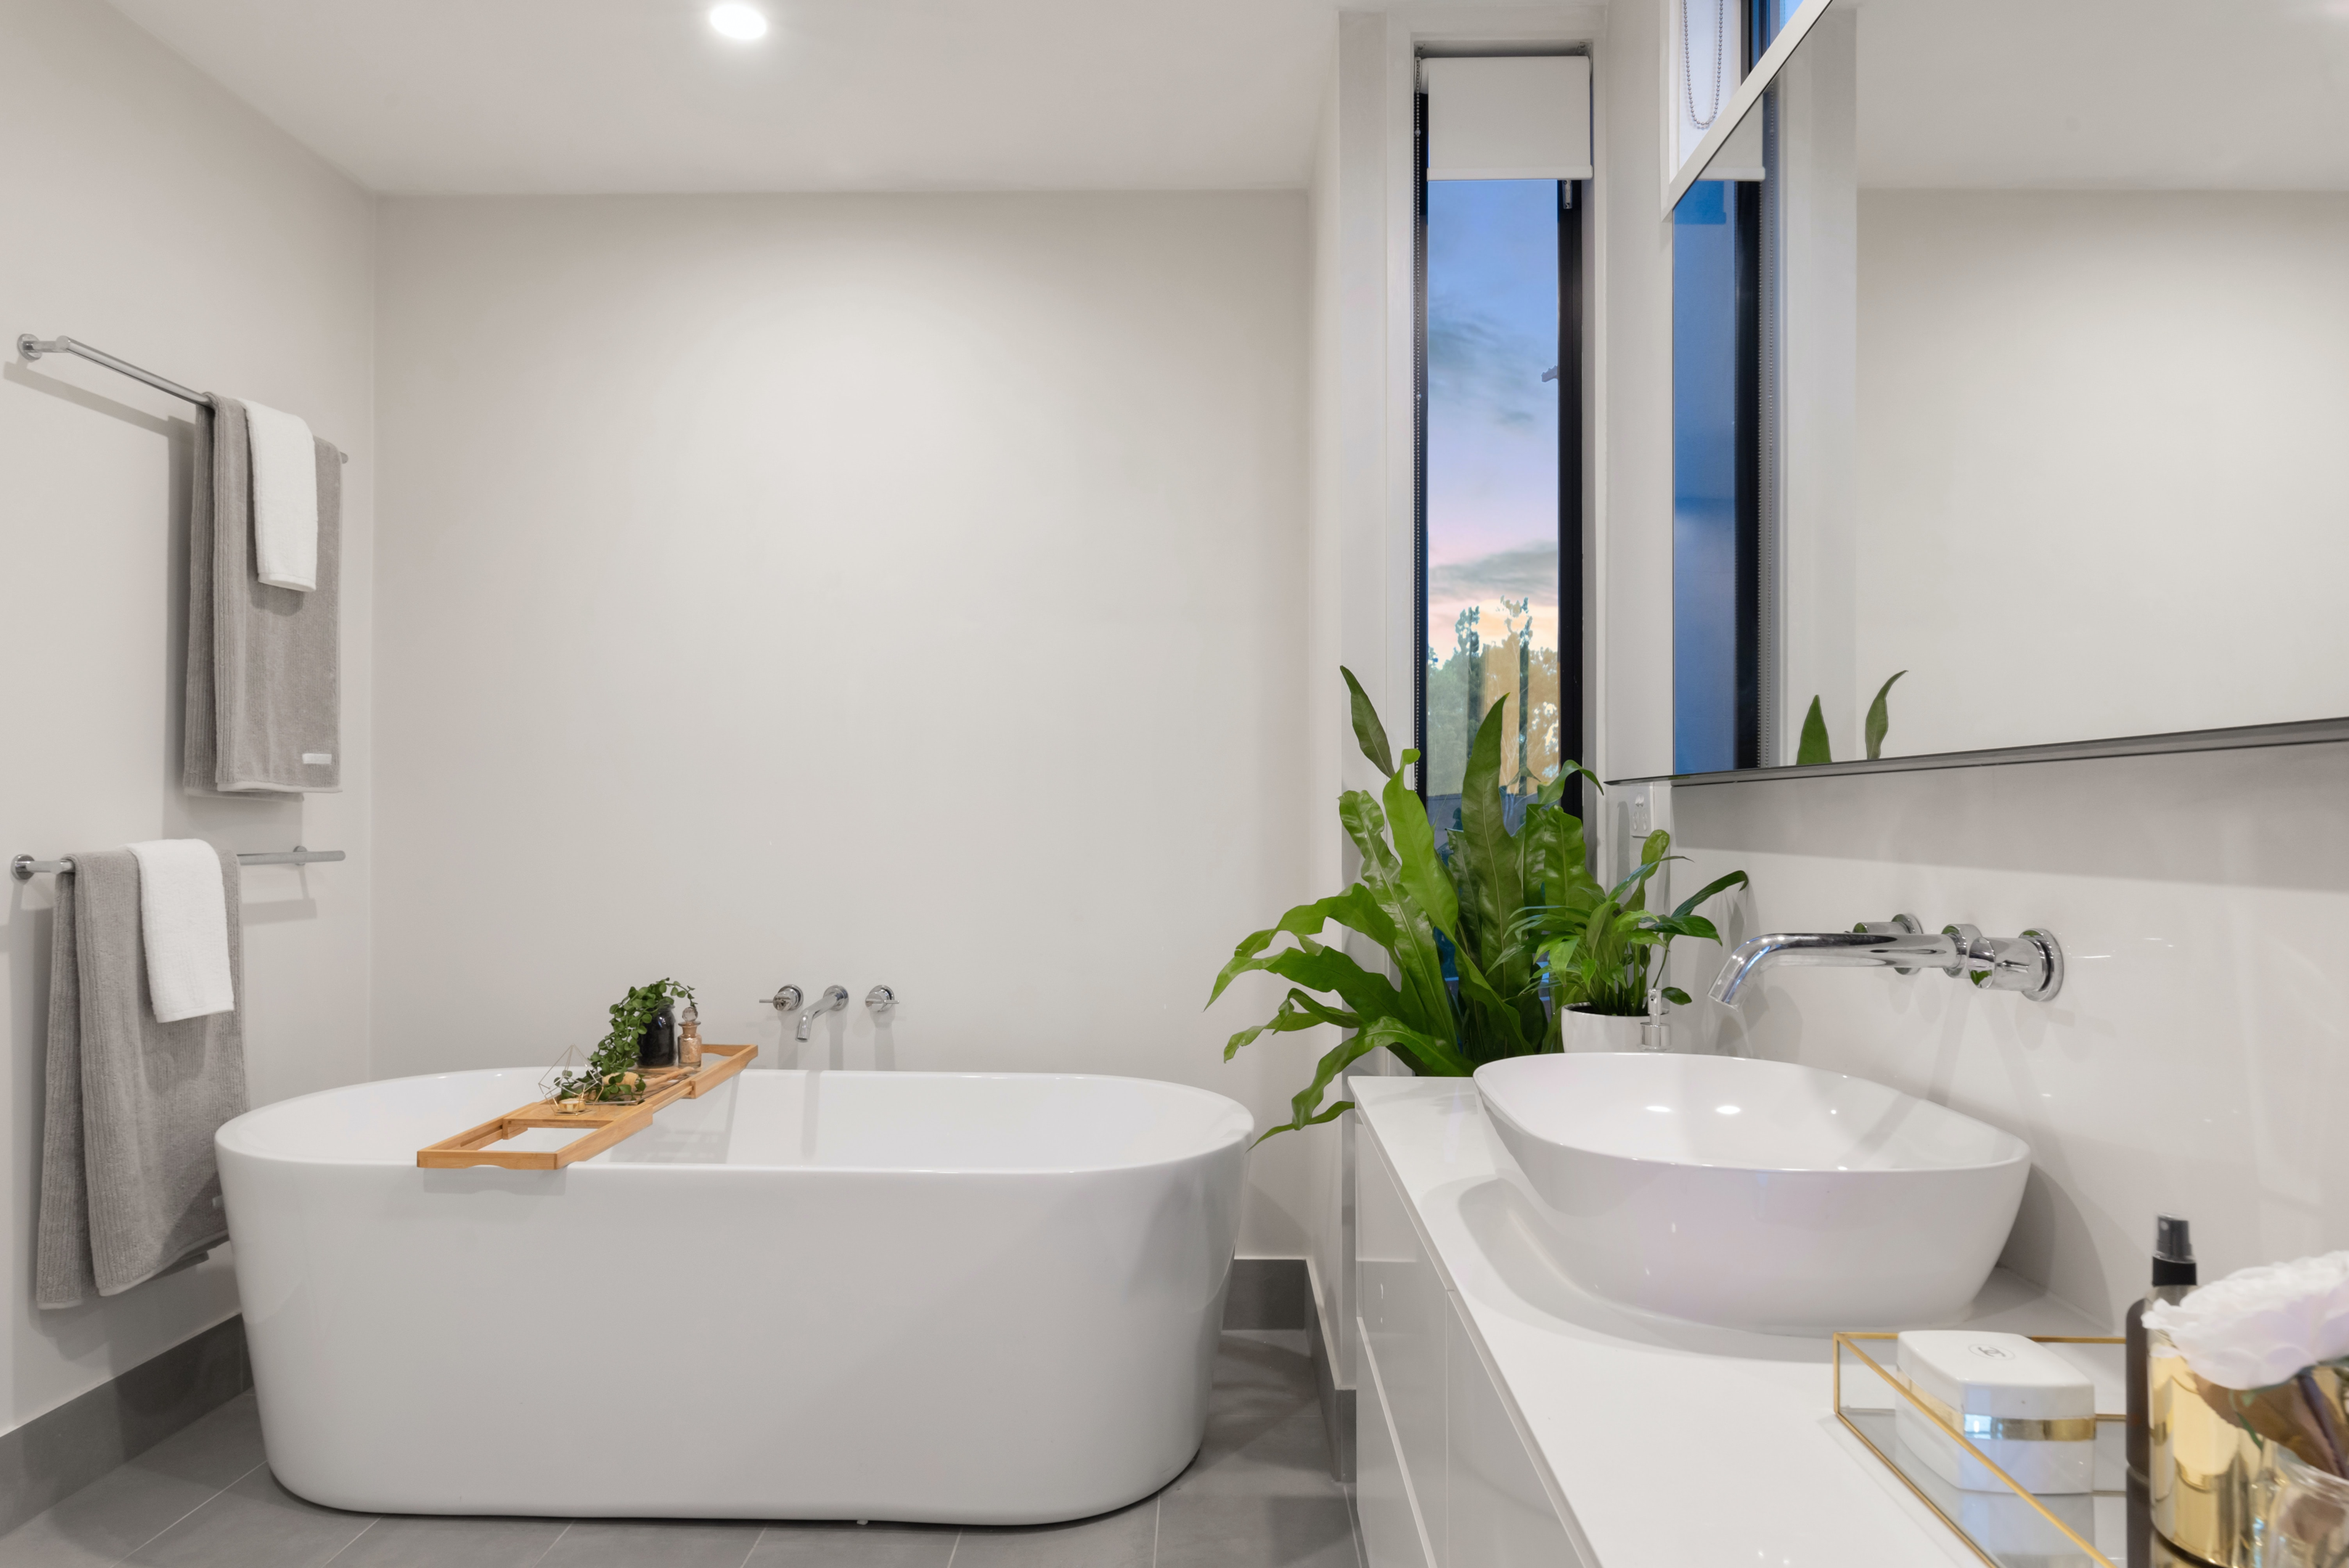 Photo of a Bathroom with white bath tub and white sink